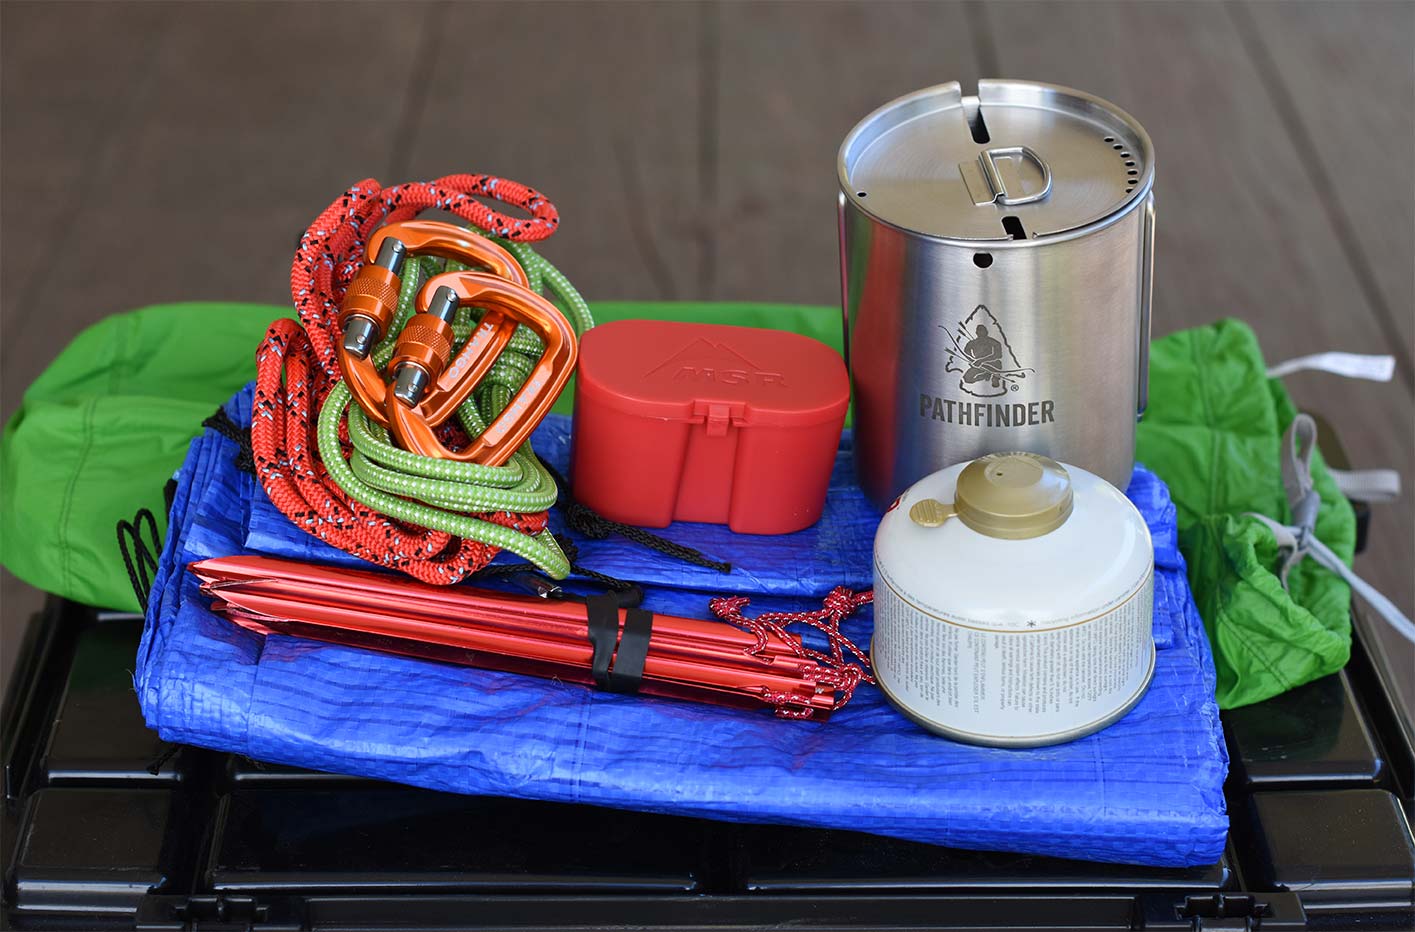 Tarp, stove, cup, rope, stakes in front of a green bag